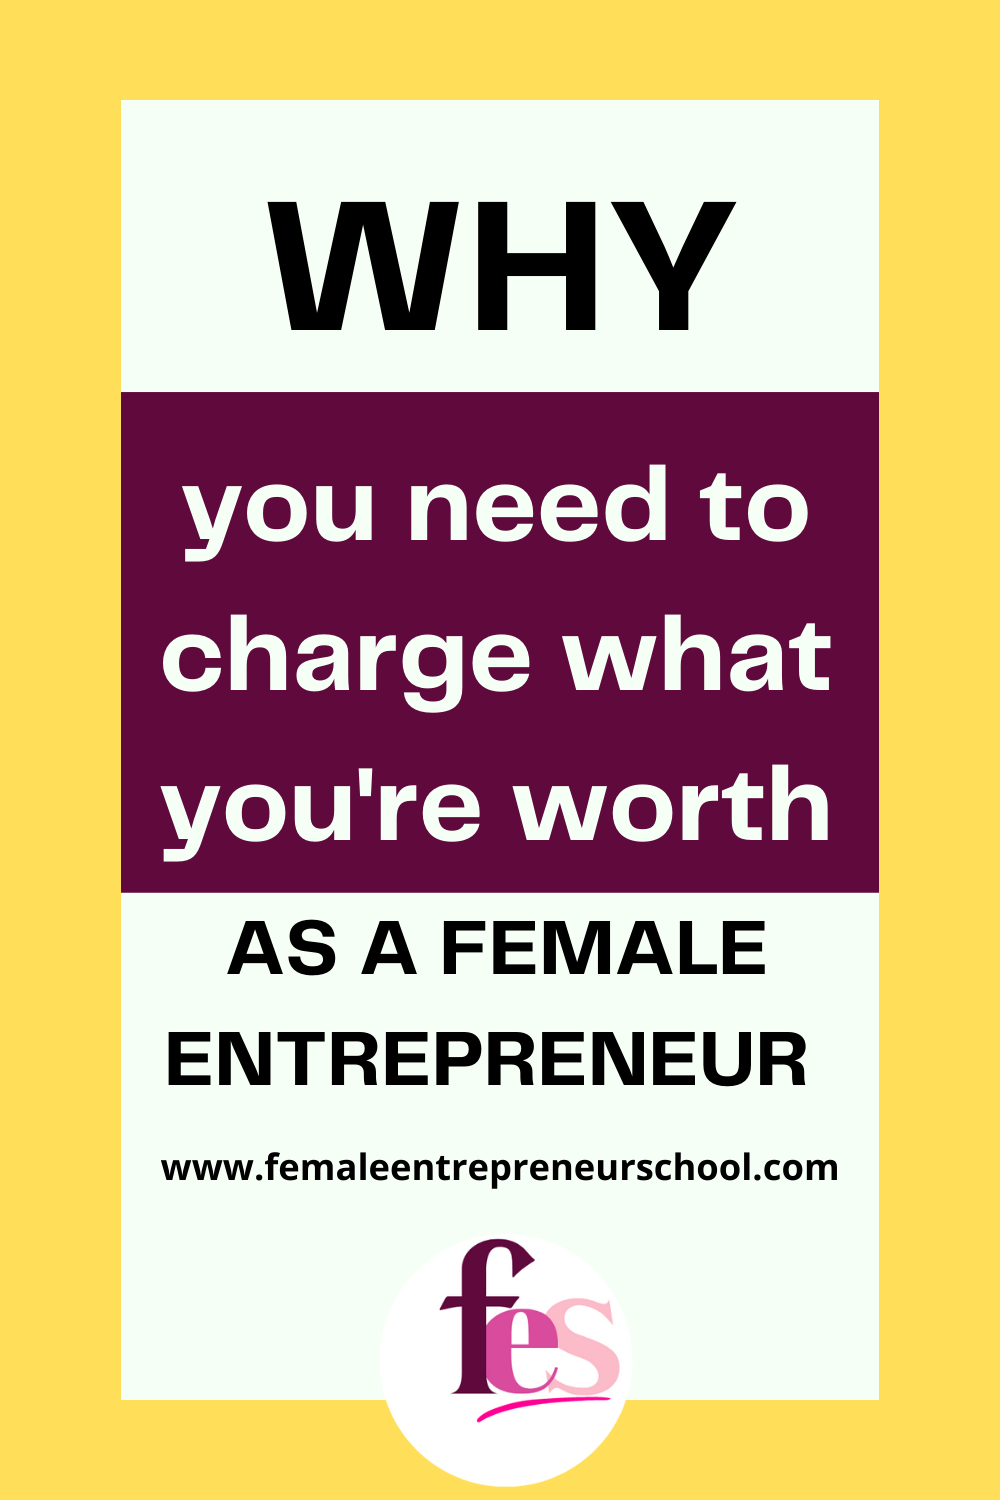 why you need to charge what you're worth as a female entrepreneur on yellow background